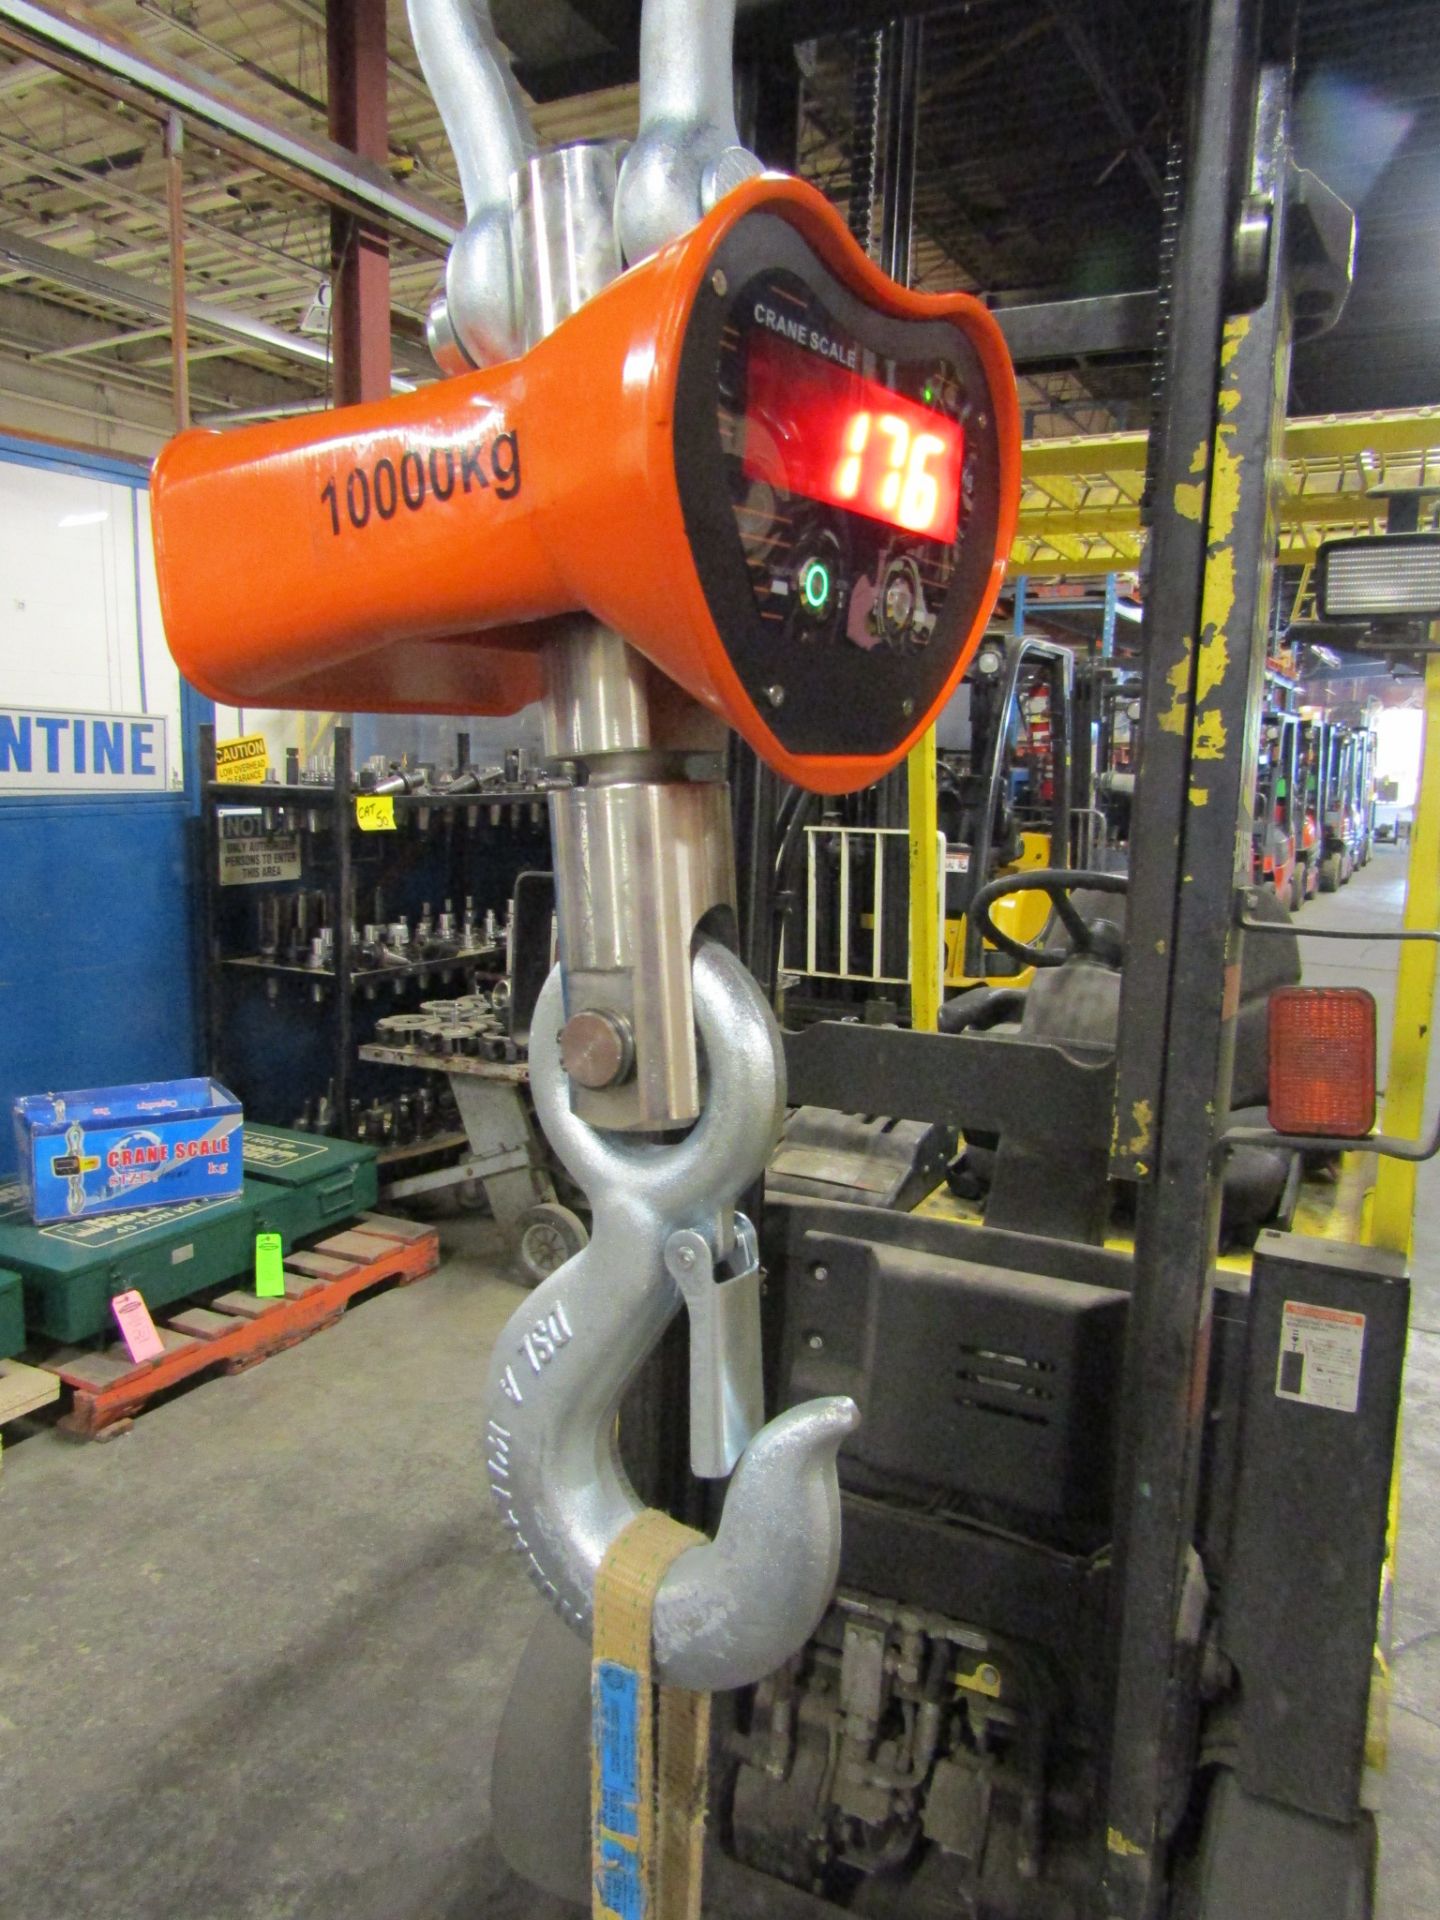 Hanging MINT Digital Crane Scale 20,000lbs 10 ton Capacity - complete with remote control and